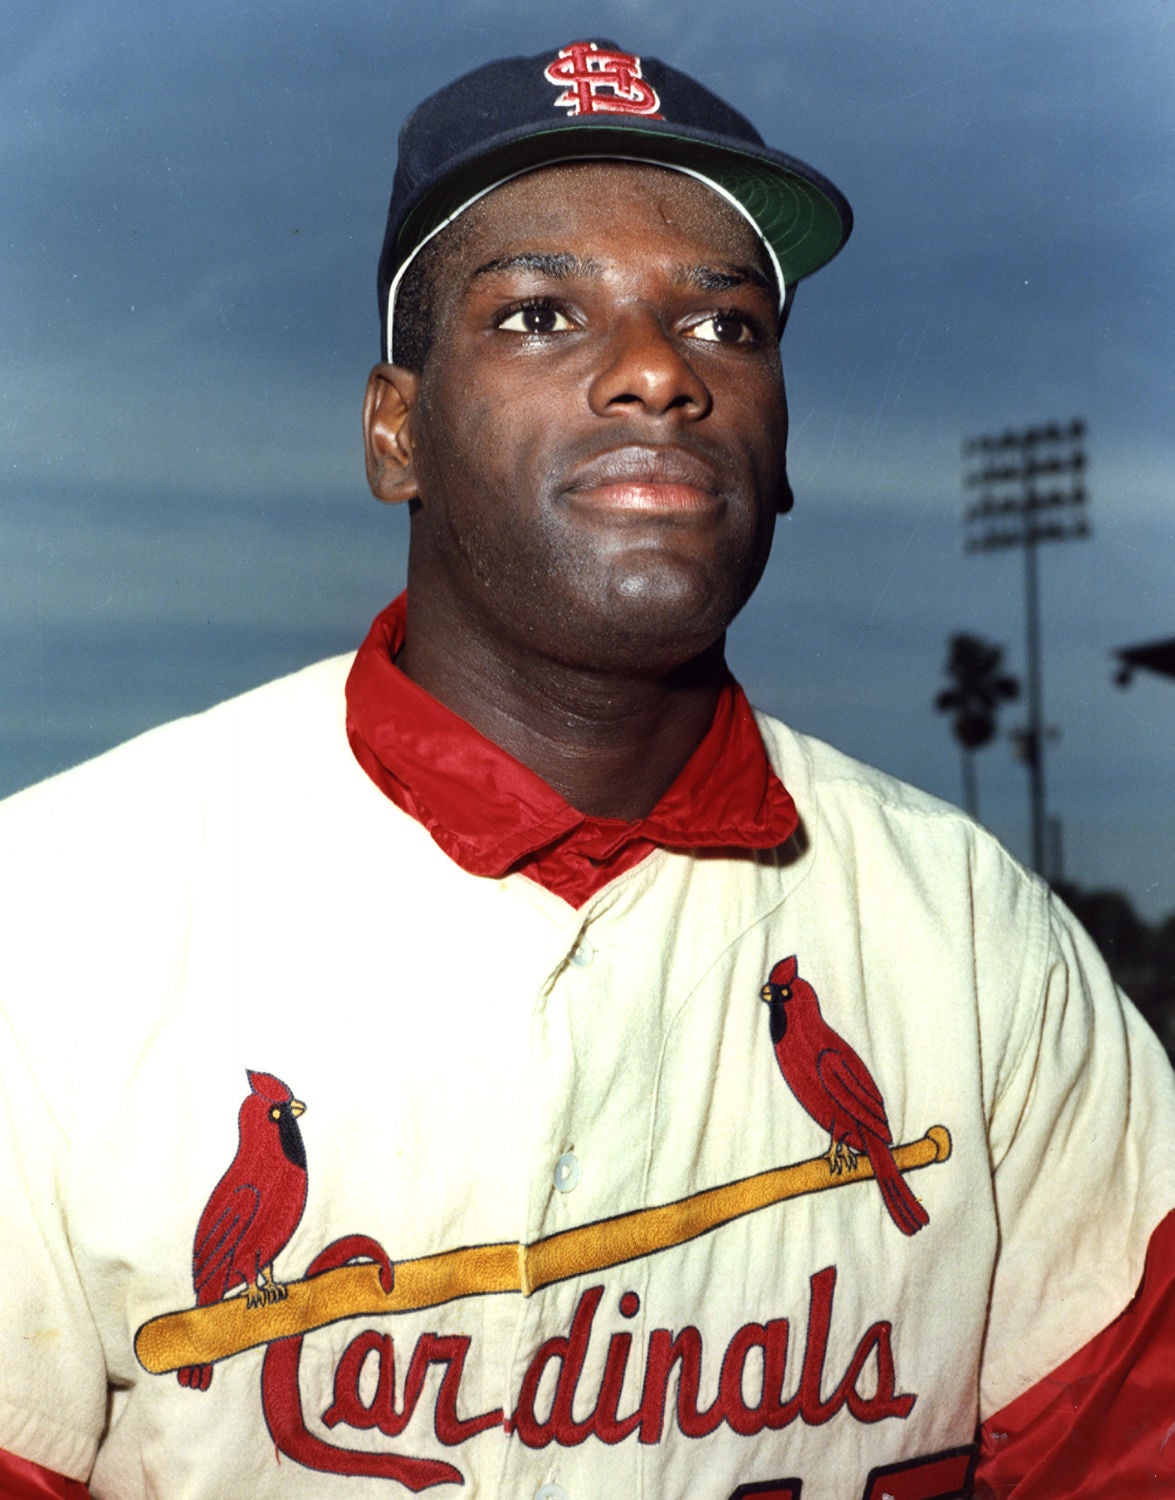 Bob Gibson, fierce Hall of Fame ace for Cardinals, dies at 84